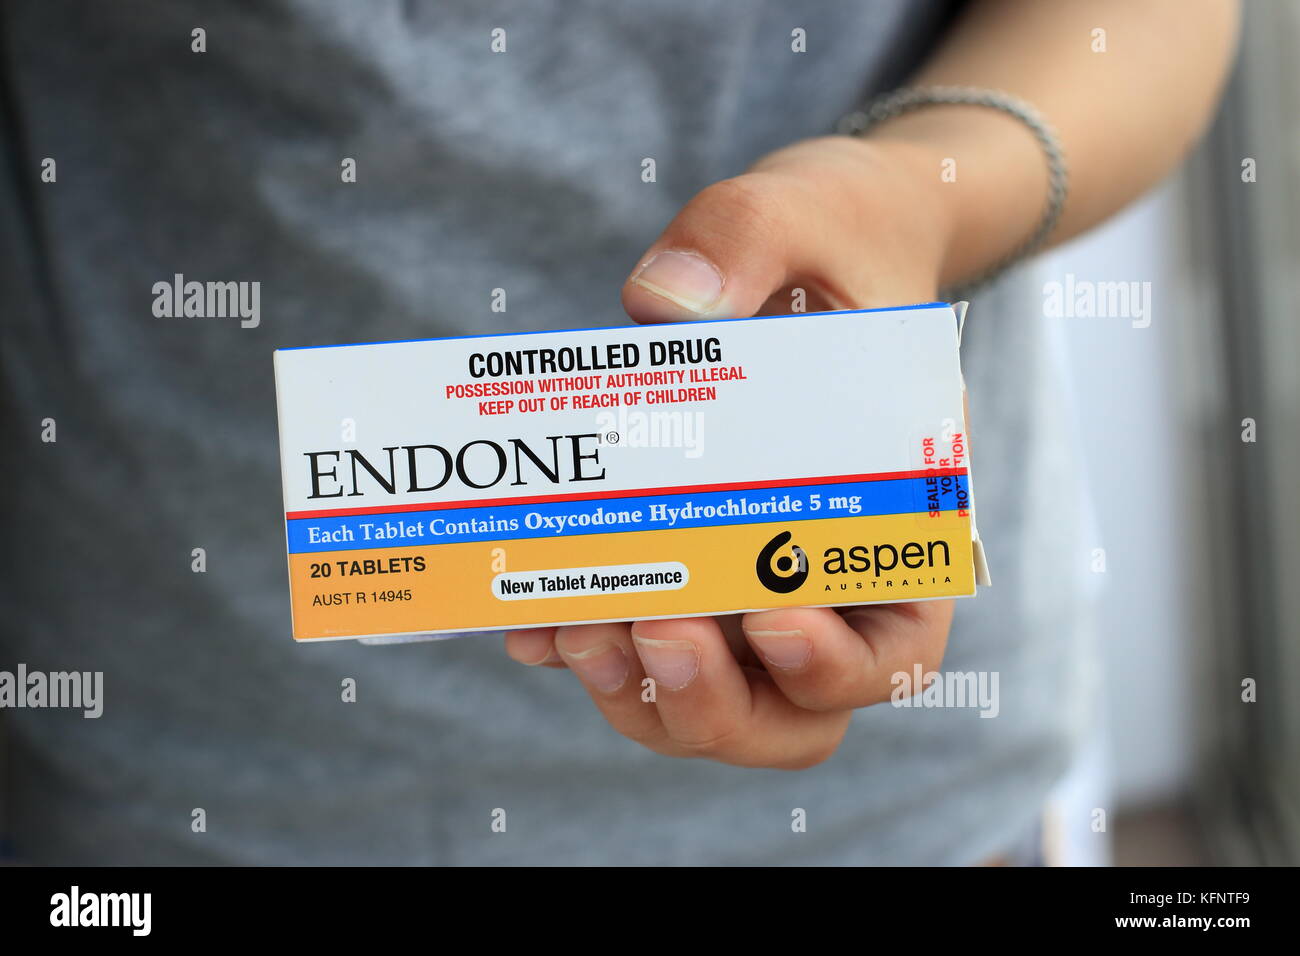 NOT AN ACTUAL MEDICATION - STOCK PHOTO ONLY! - Prescription painkiller Endone - strong pain killer Stock Photo